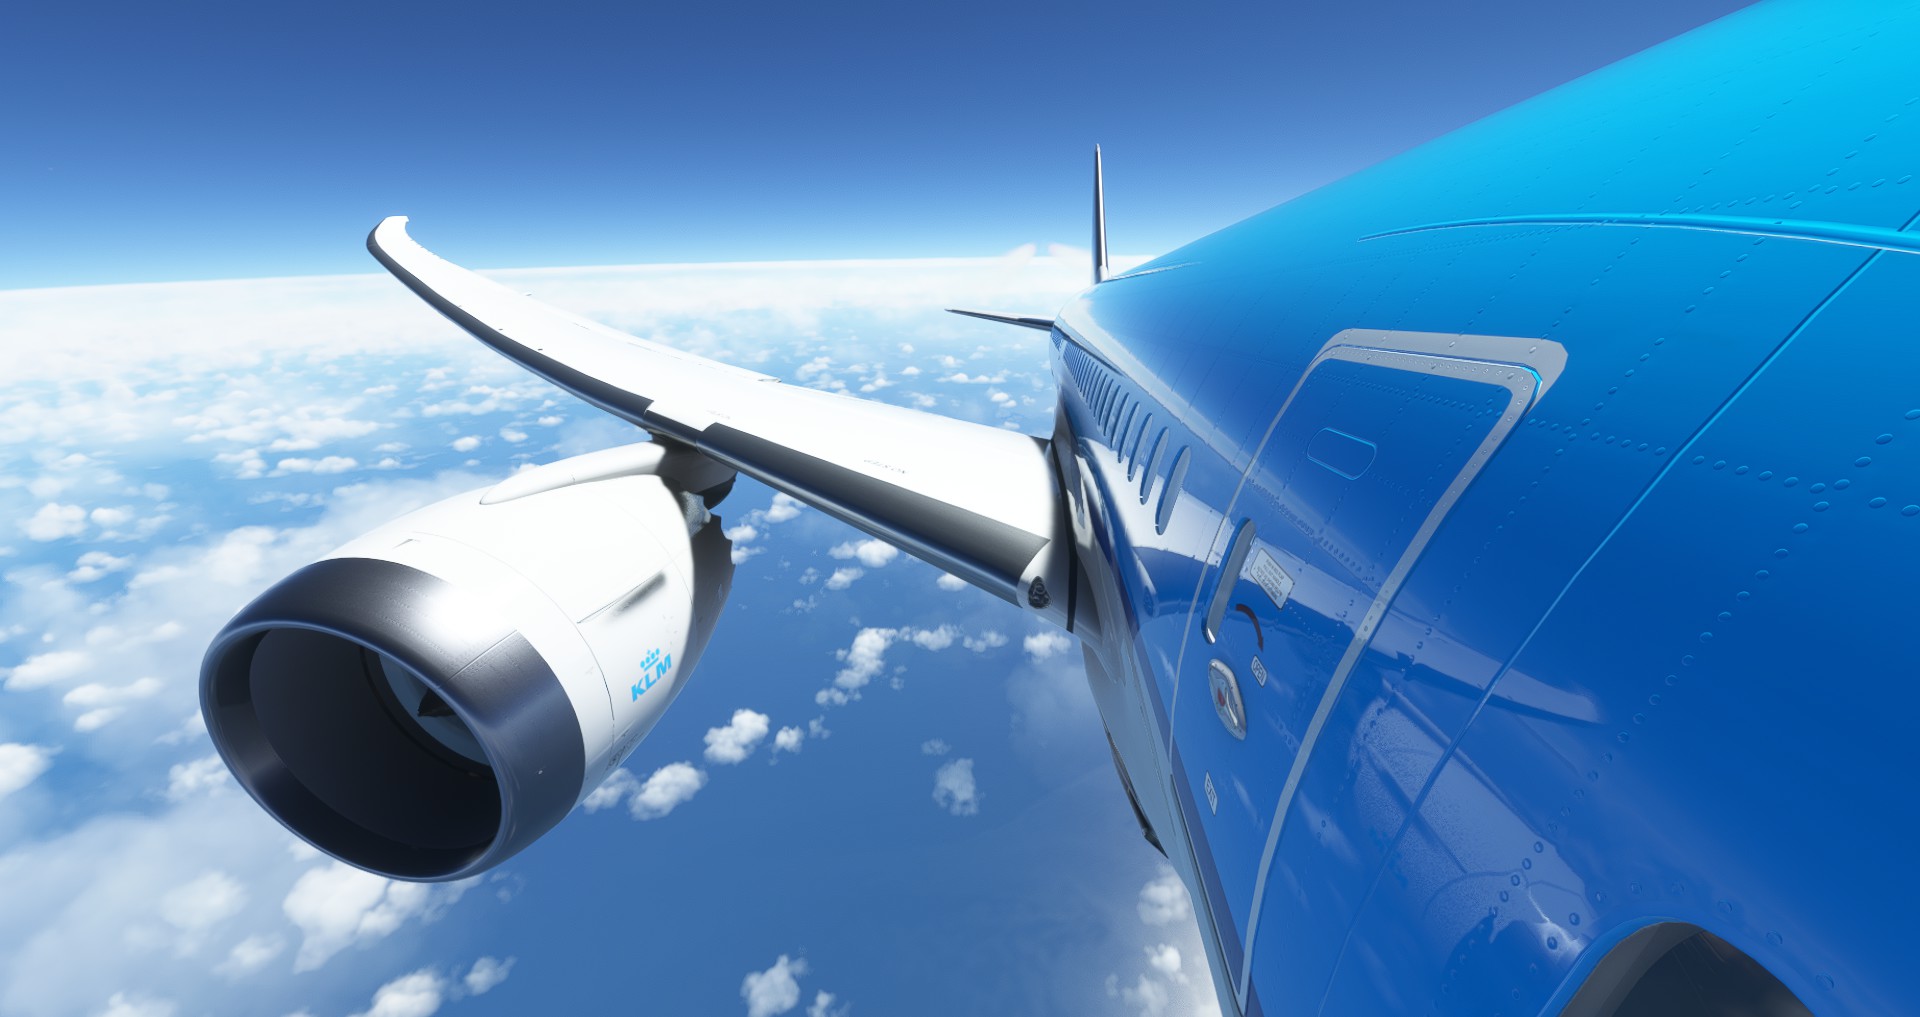 Rear-looking view of a wing, engine, and fuselage of a Boeing 787 Dreamliner with KLM livery. The wing is reflected in the aircraft's skin.